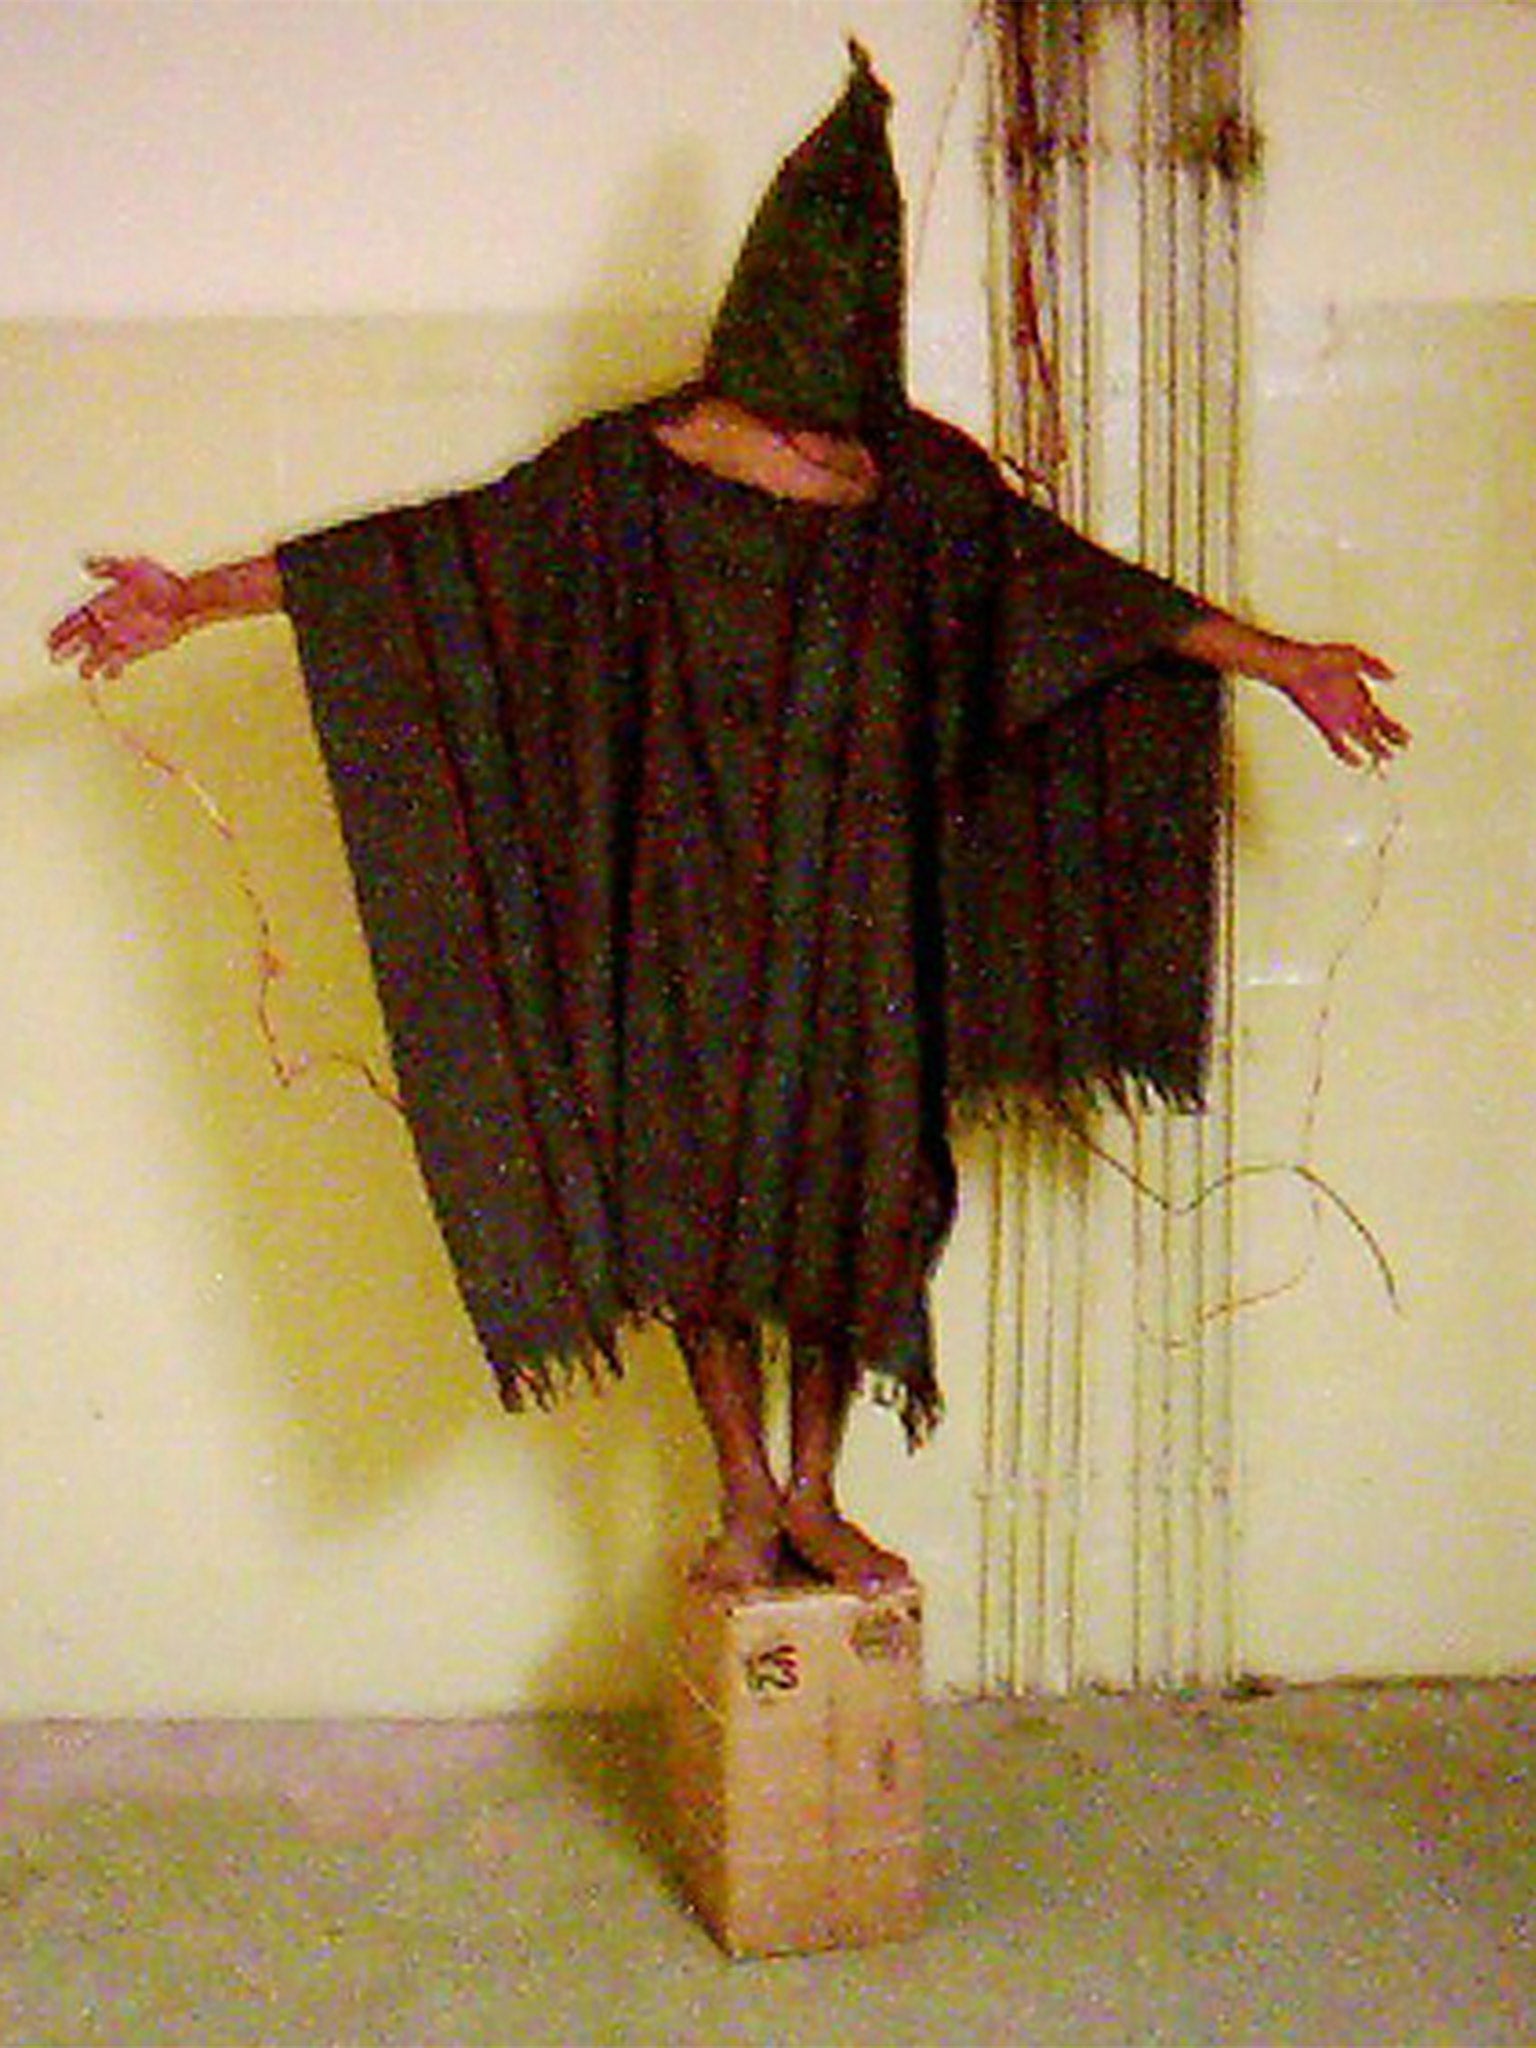 A detainee with wires attached to him in Abu Ghraib prison in Baghdad in 2003